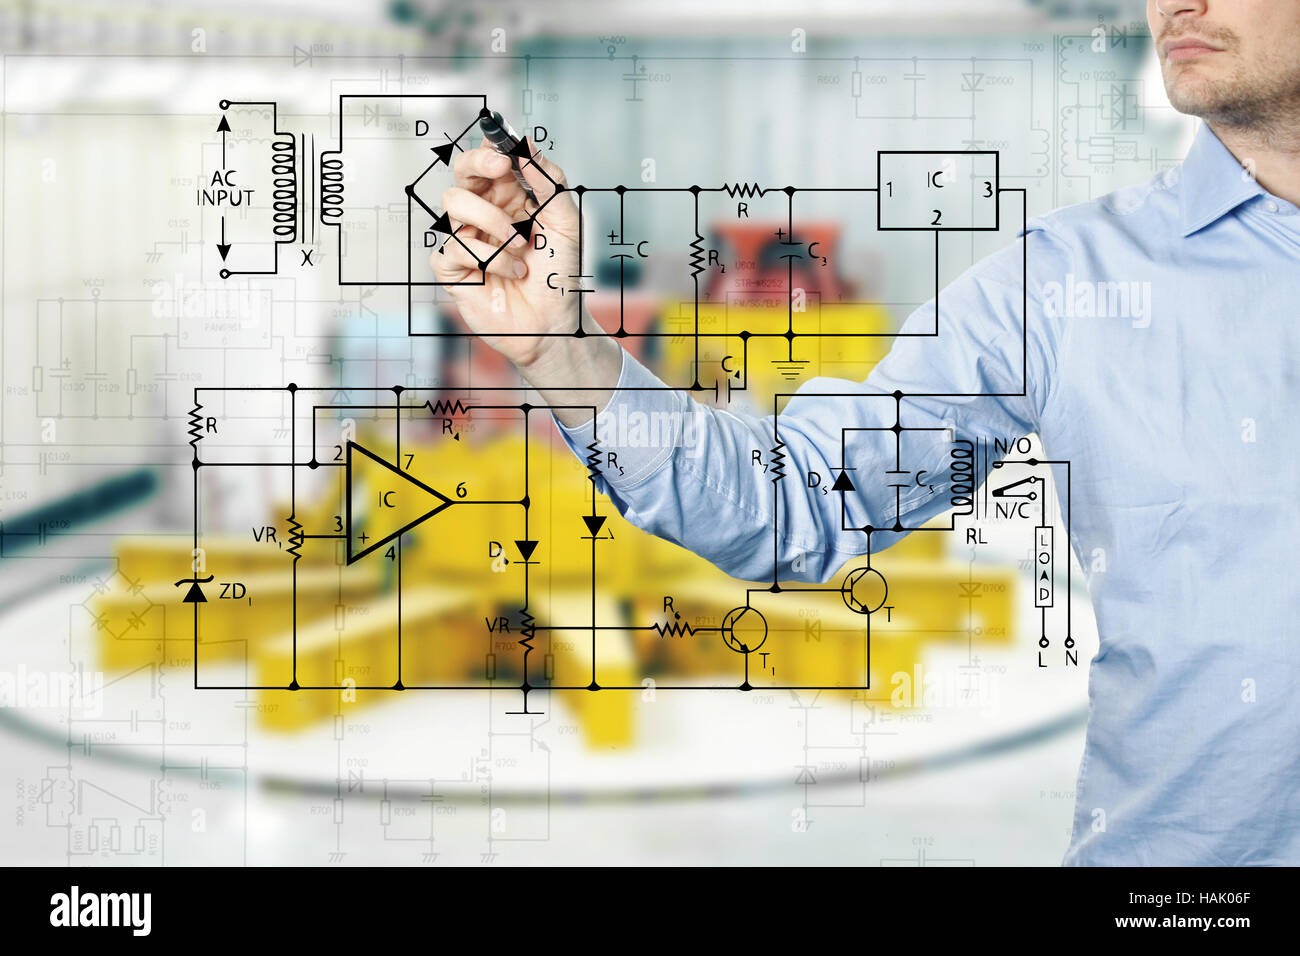 electrical engineer draws a diagram of a circuit. power plant interior in background Stock Photo